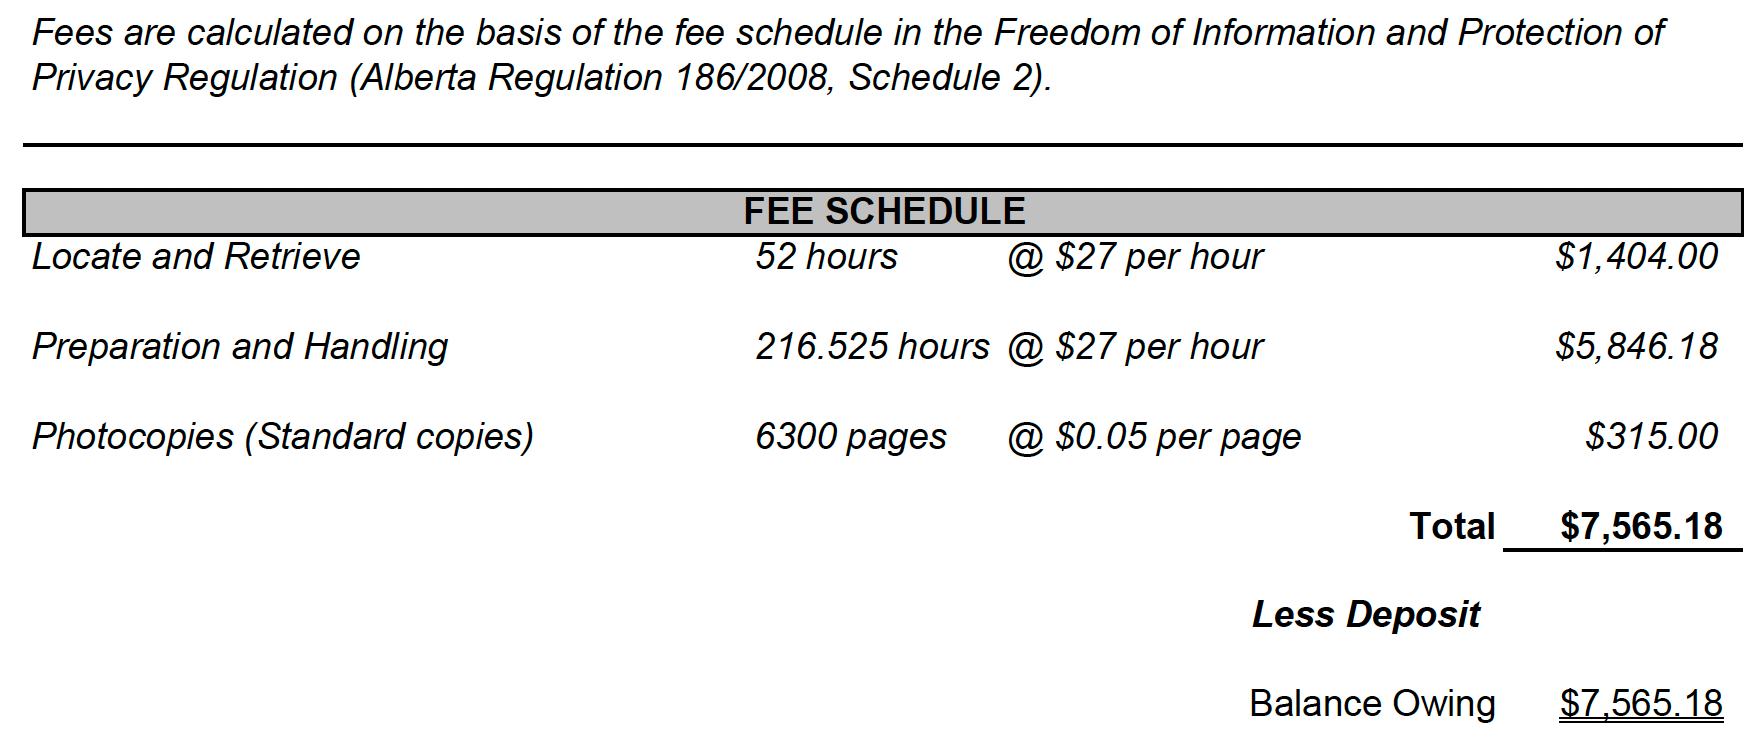 Fees calculated for the above-mentioned freedom of information request, totallign over $7,500.